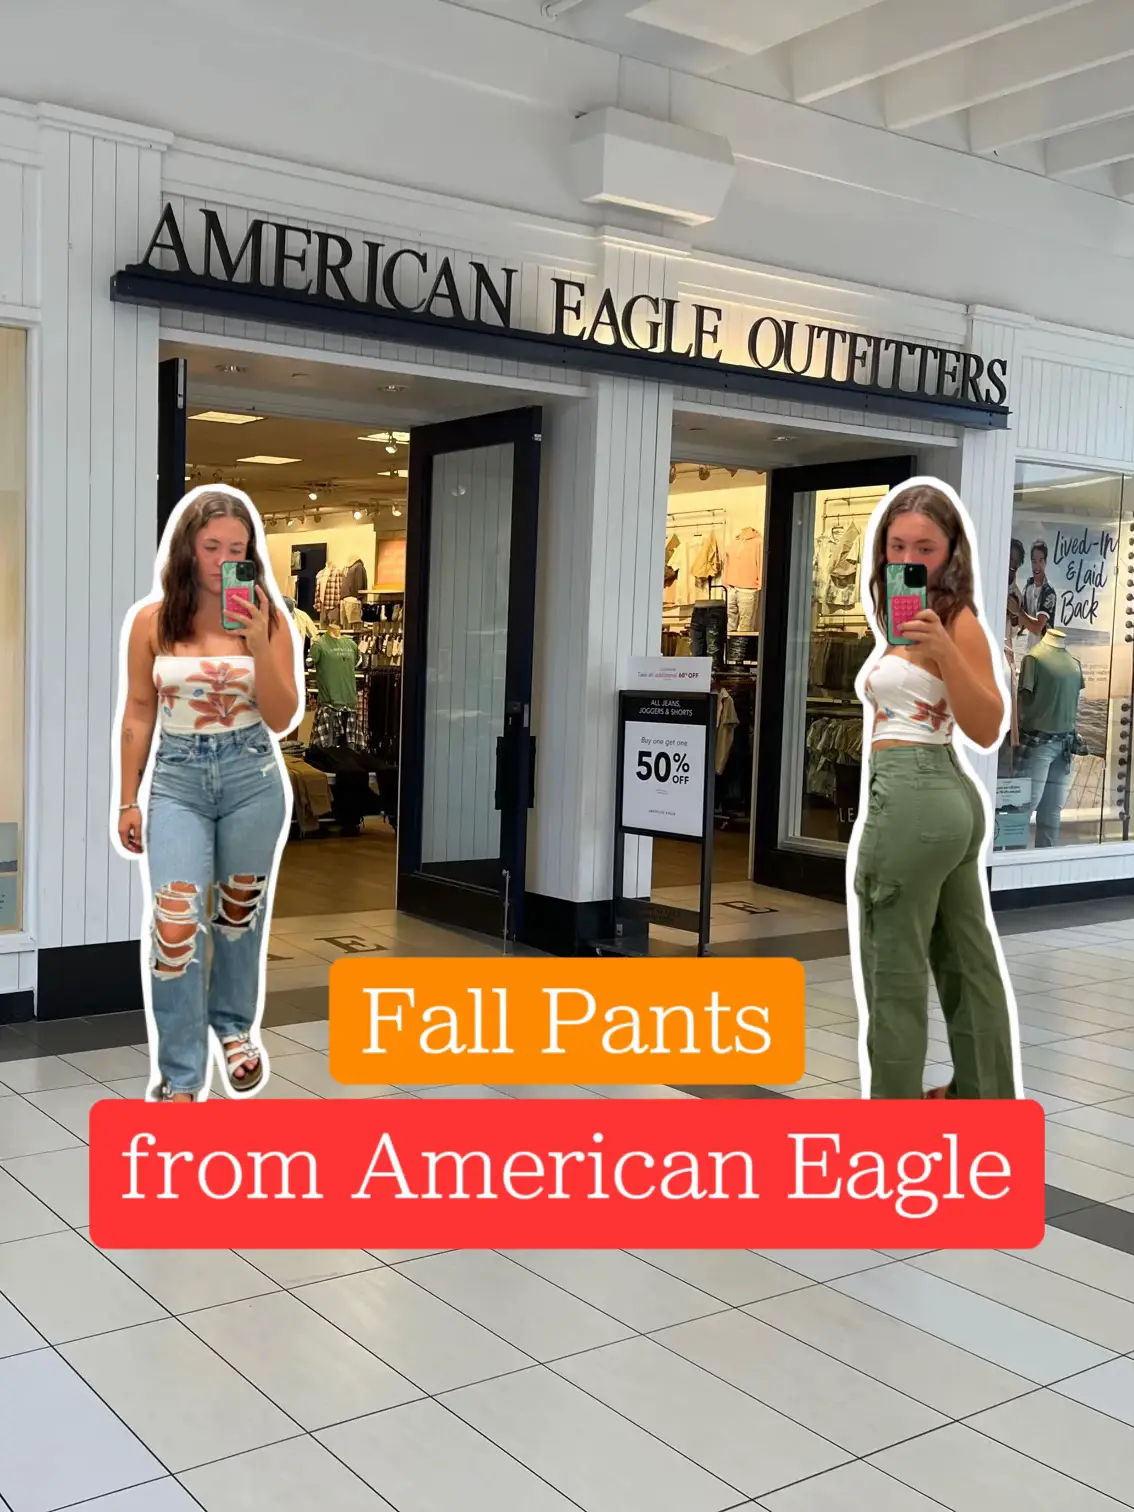 Ive been wanting them forever… #aerie #americaneagle #winter